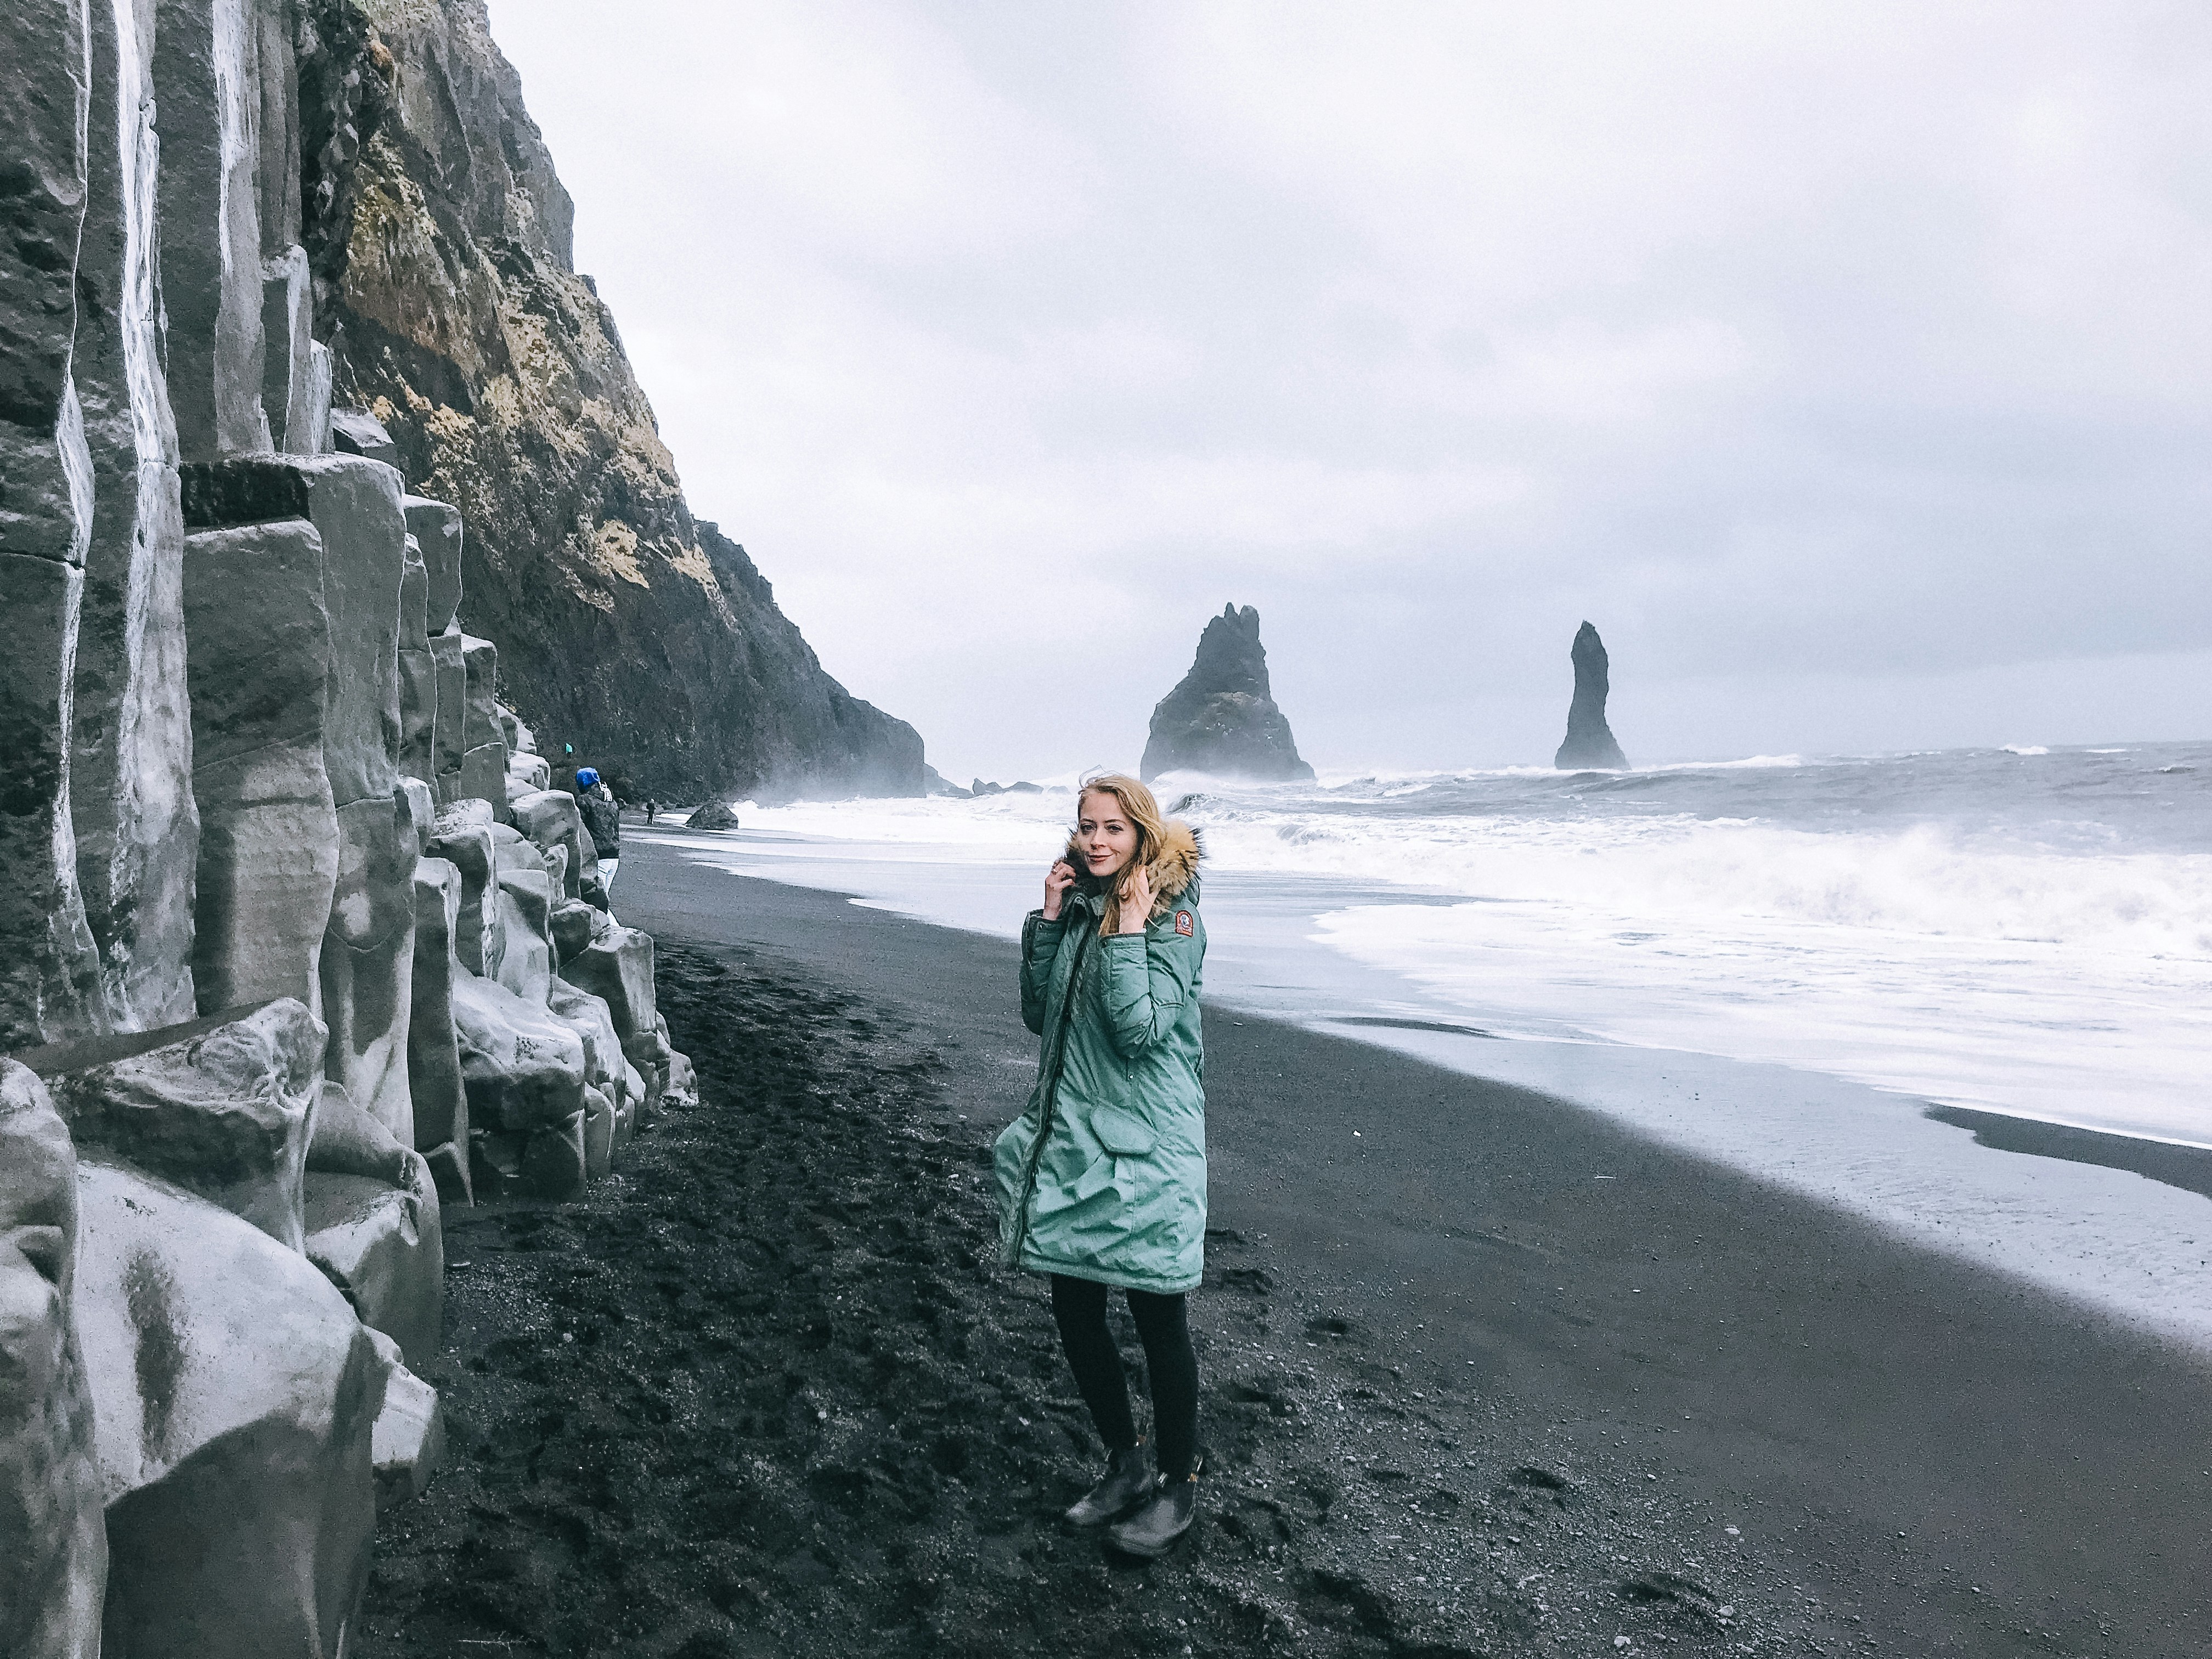 Reynisfjara black sand beach is dangerous to visit, but gorgeous even in bad weather conditions. I wore a classic parka from Parajumpers to handle the elements.